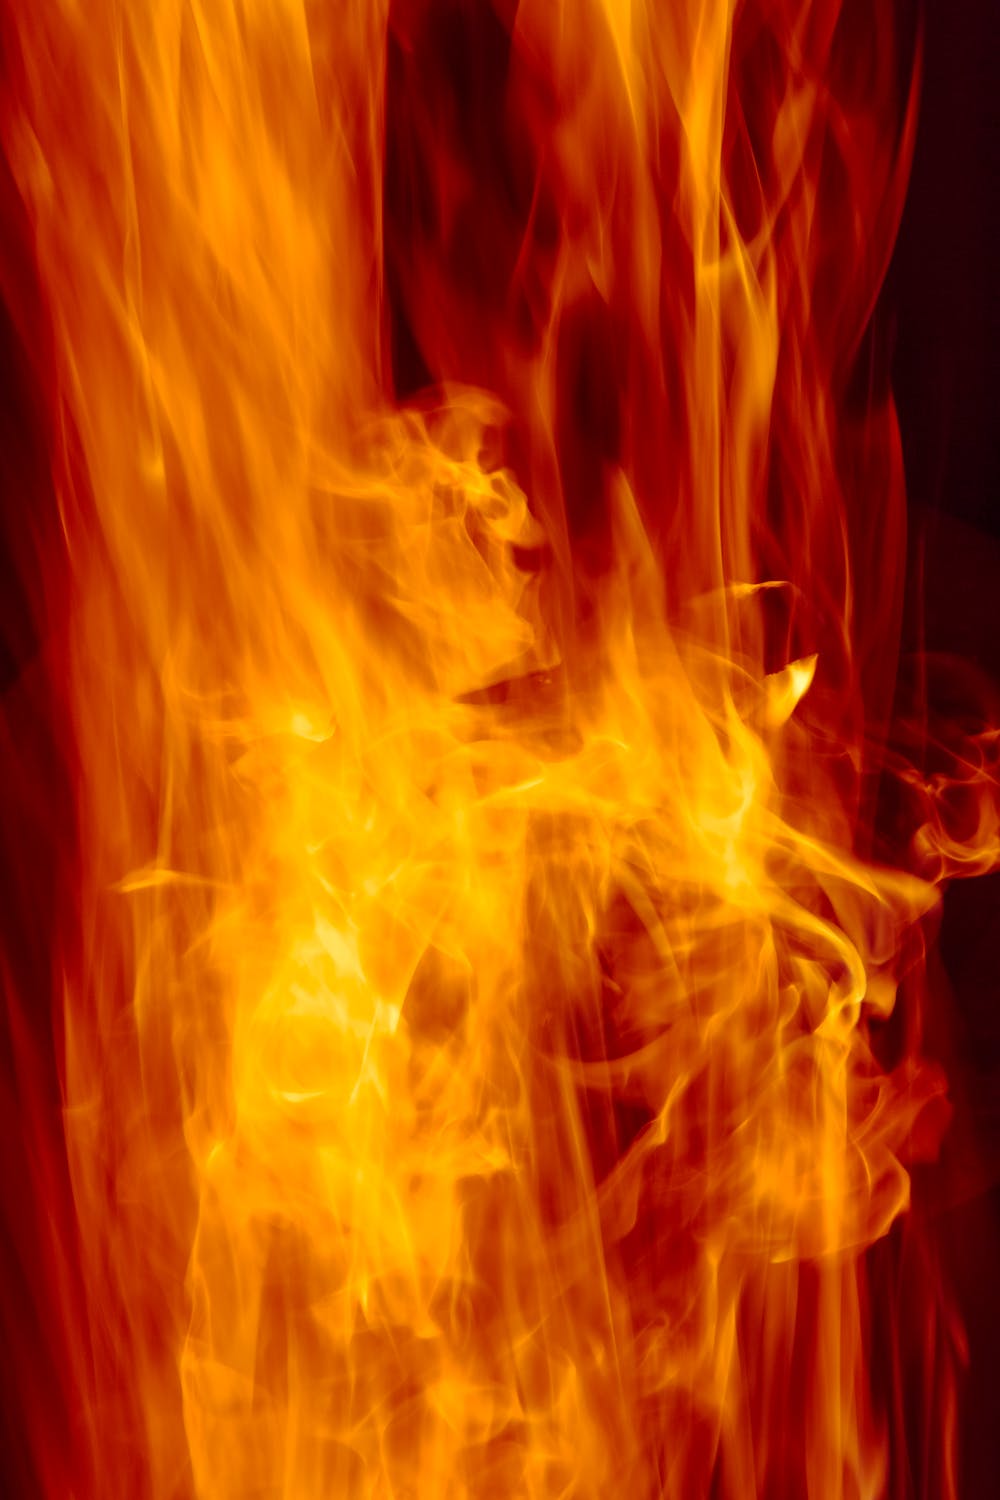 The FIRE of PENTECOST